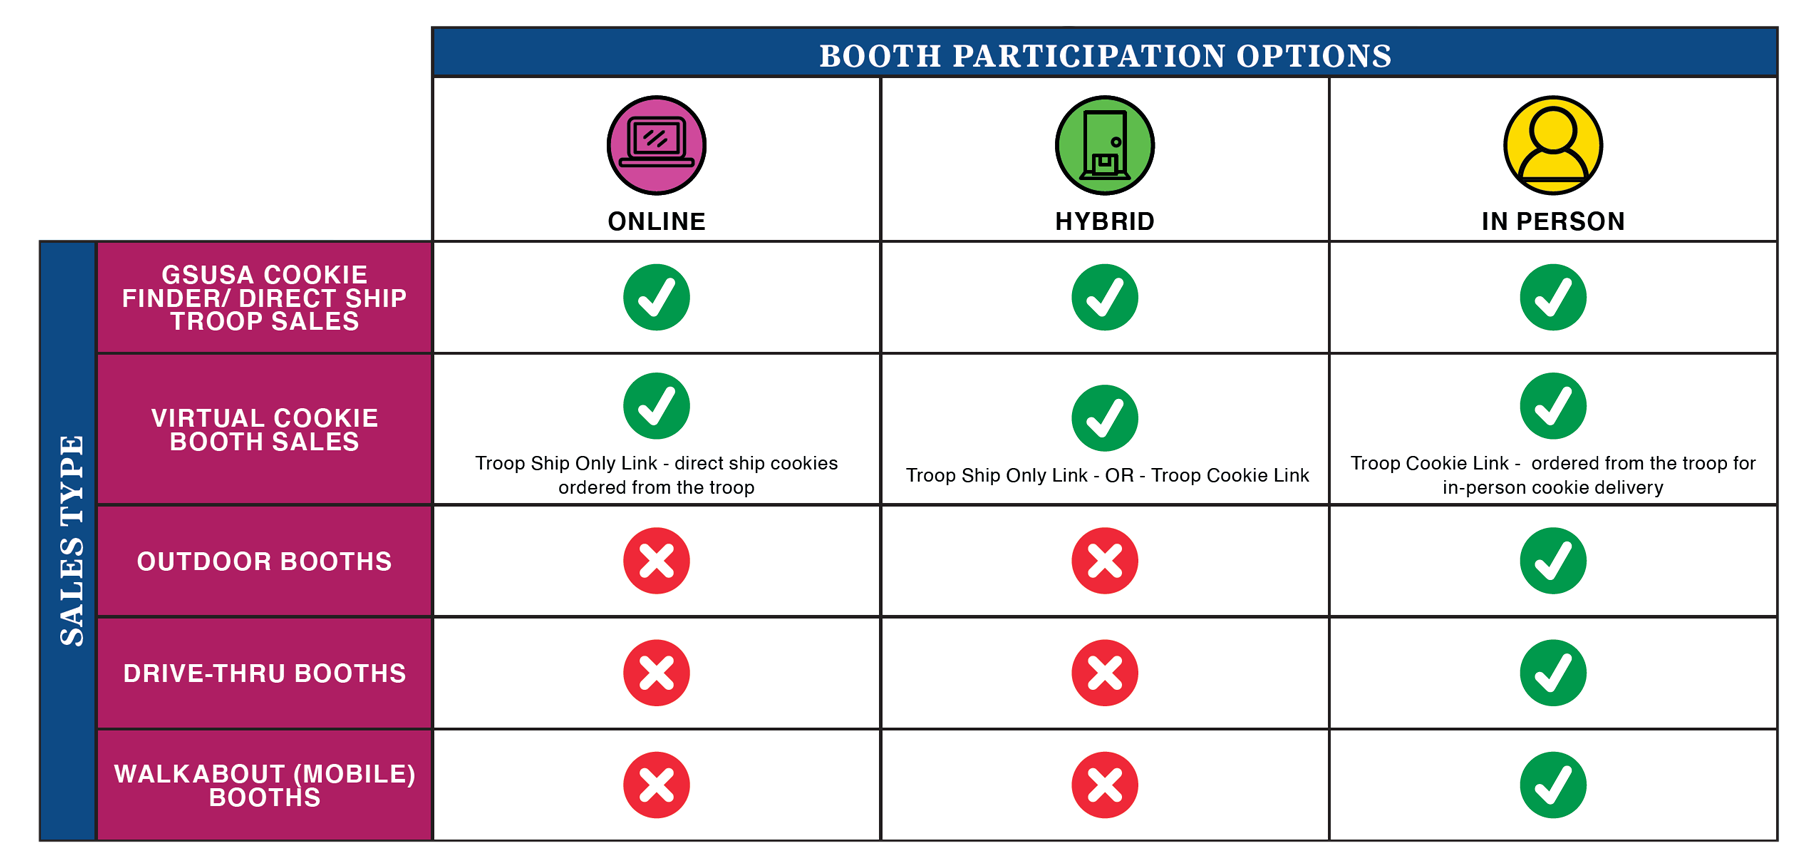 Booth Types & Participation Options Table